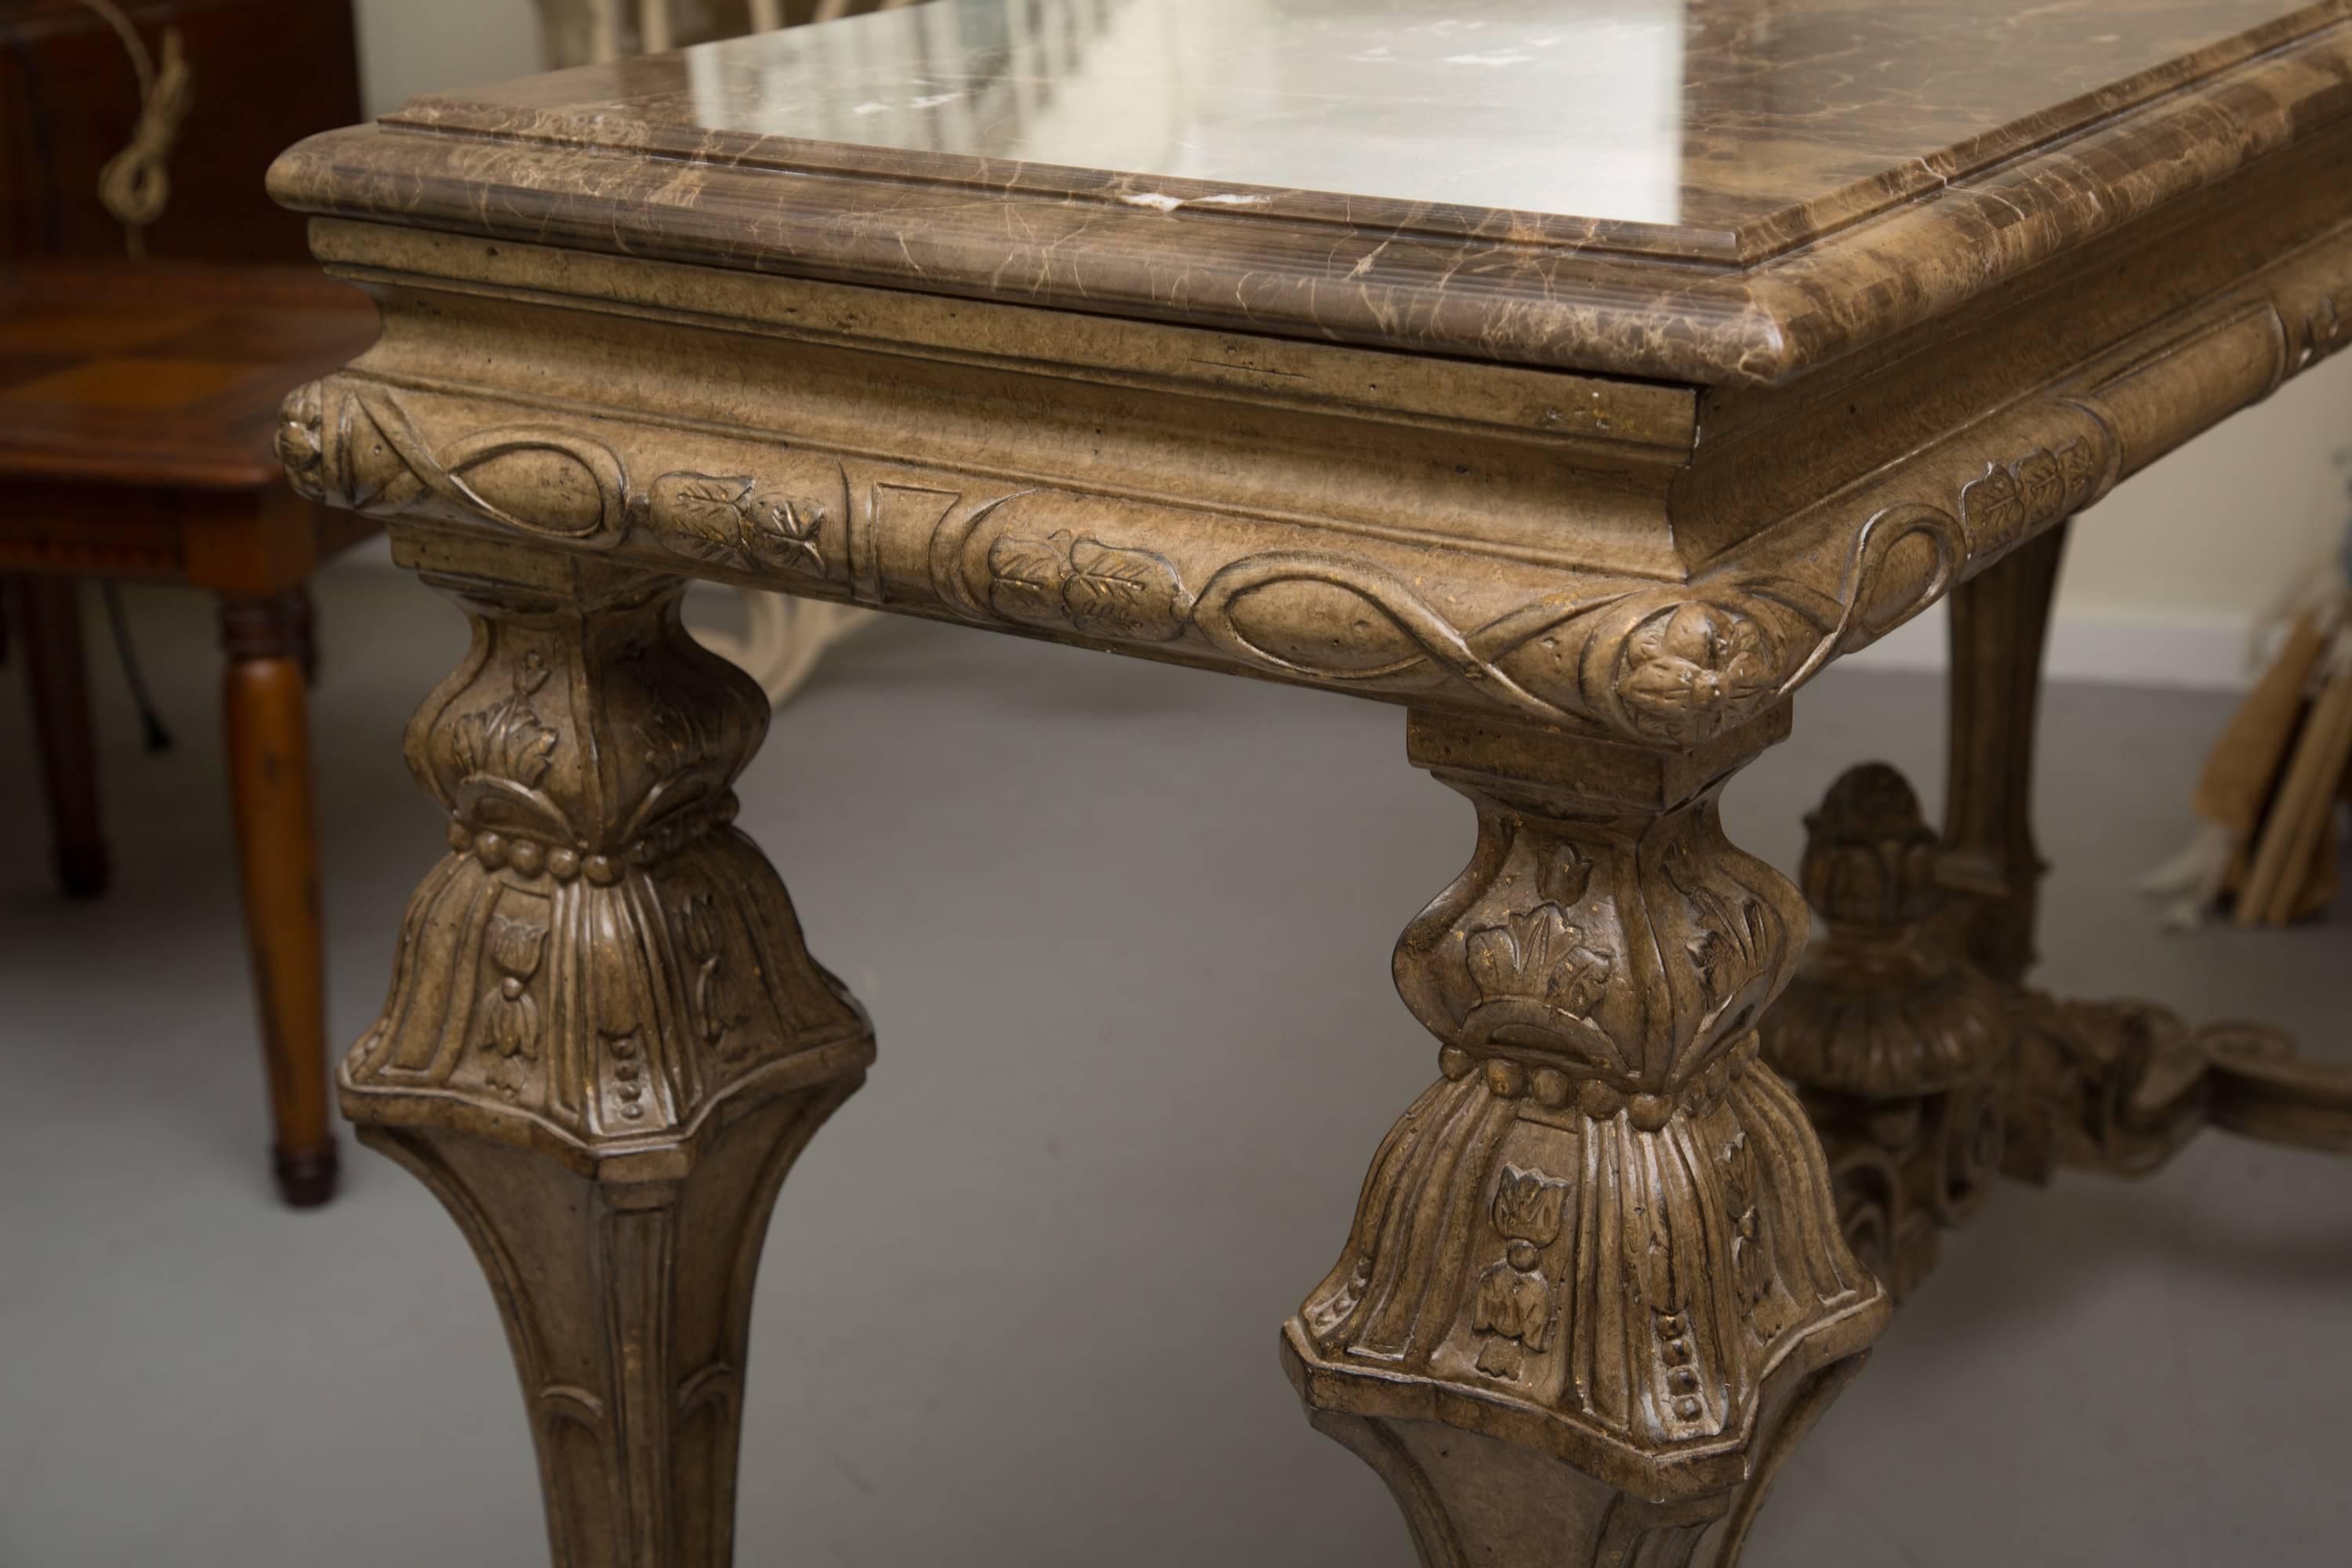 This rectangular console table can serve as a sofa table, centre table or as an impressive wall table as an anchor for any room. The marble-top rests on a deep frieze with hand-carved features typical of high style Italian Renaissance design. The